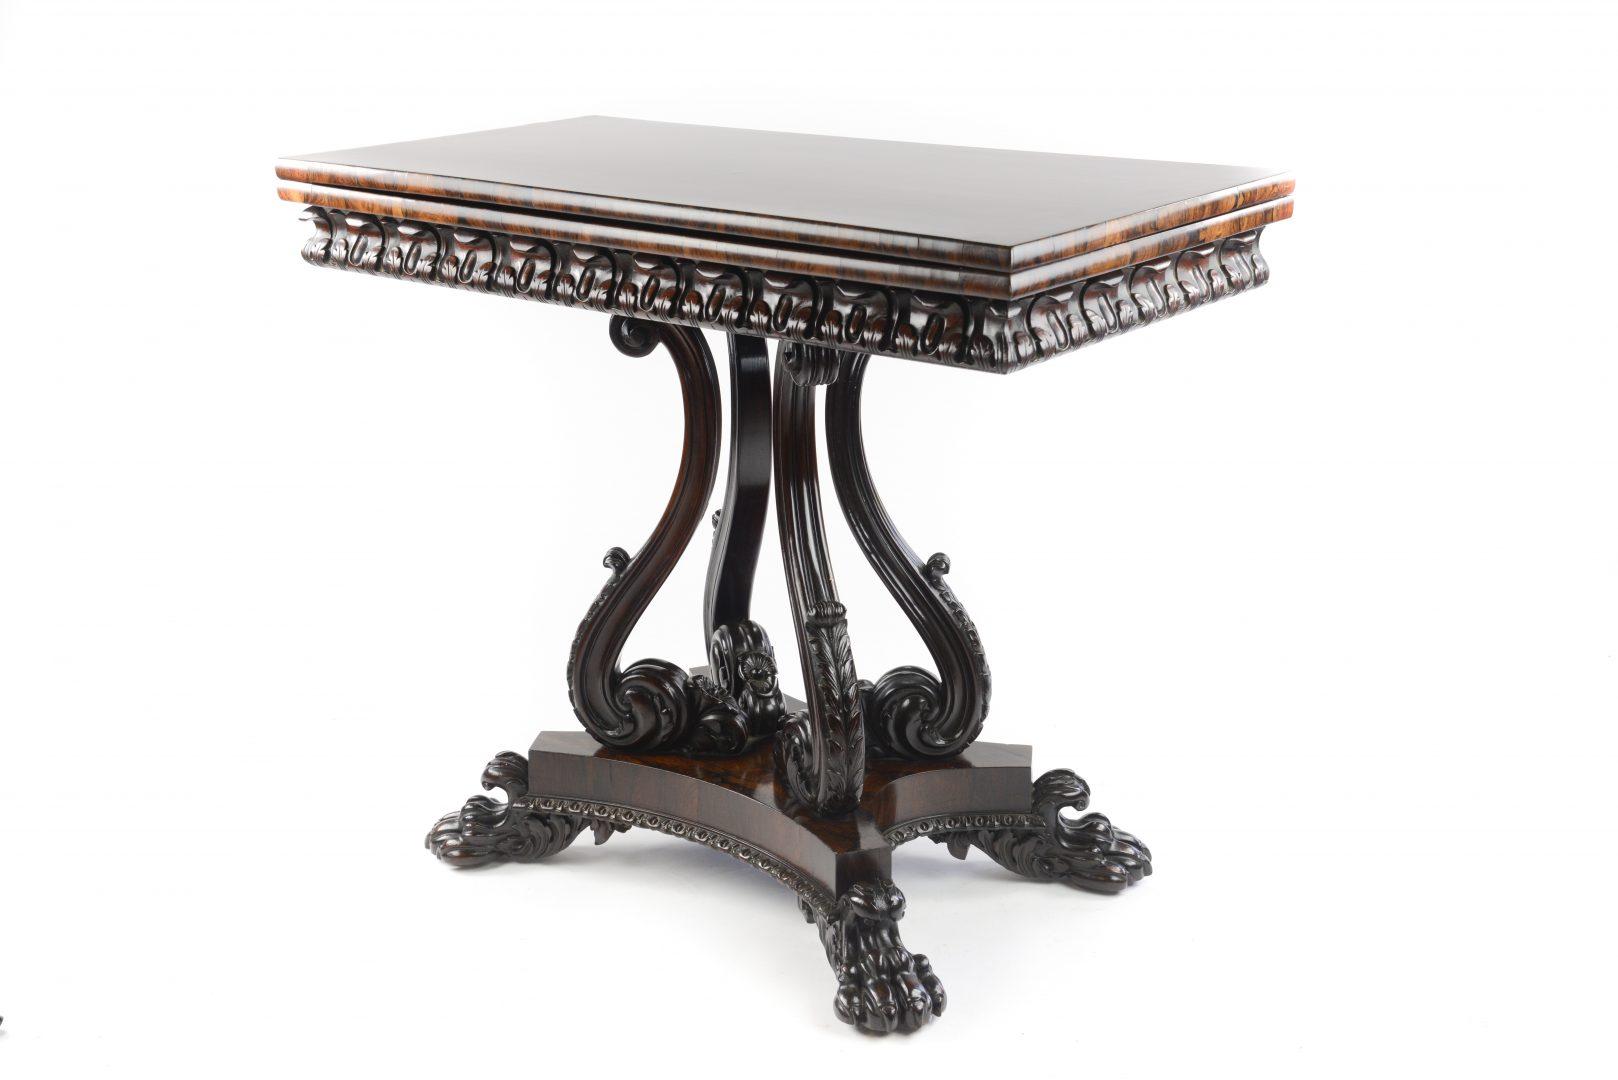 British Fine Quality William IV Rosewood Card Table, Attributed to Gillows